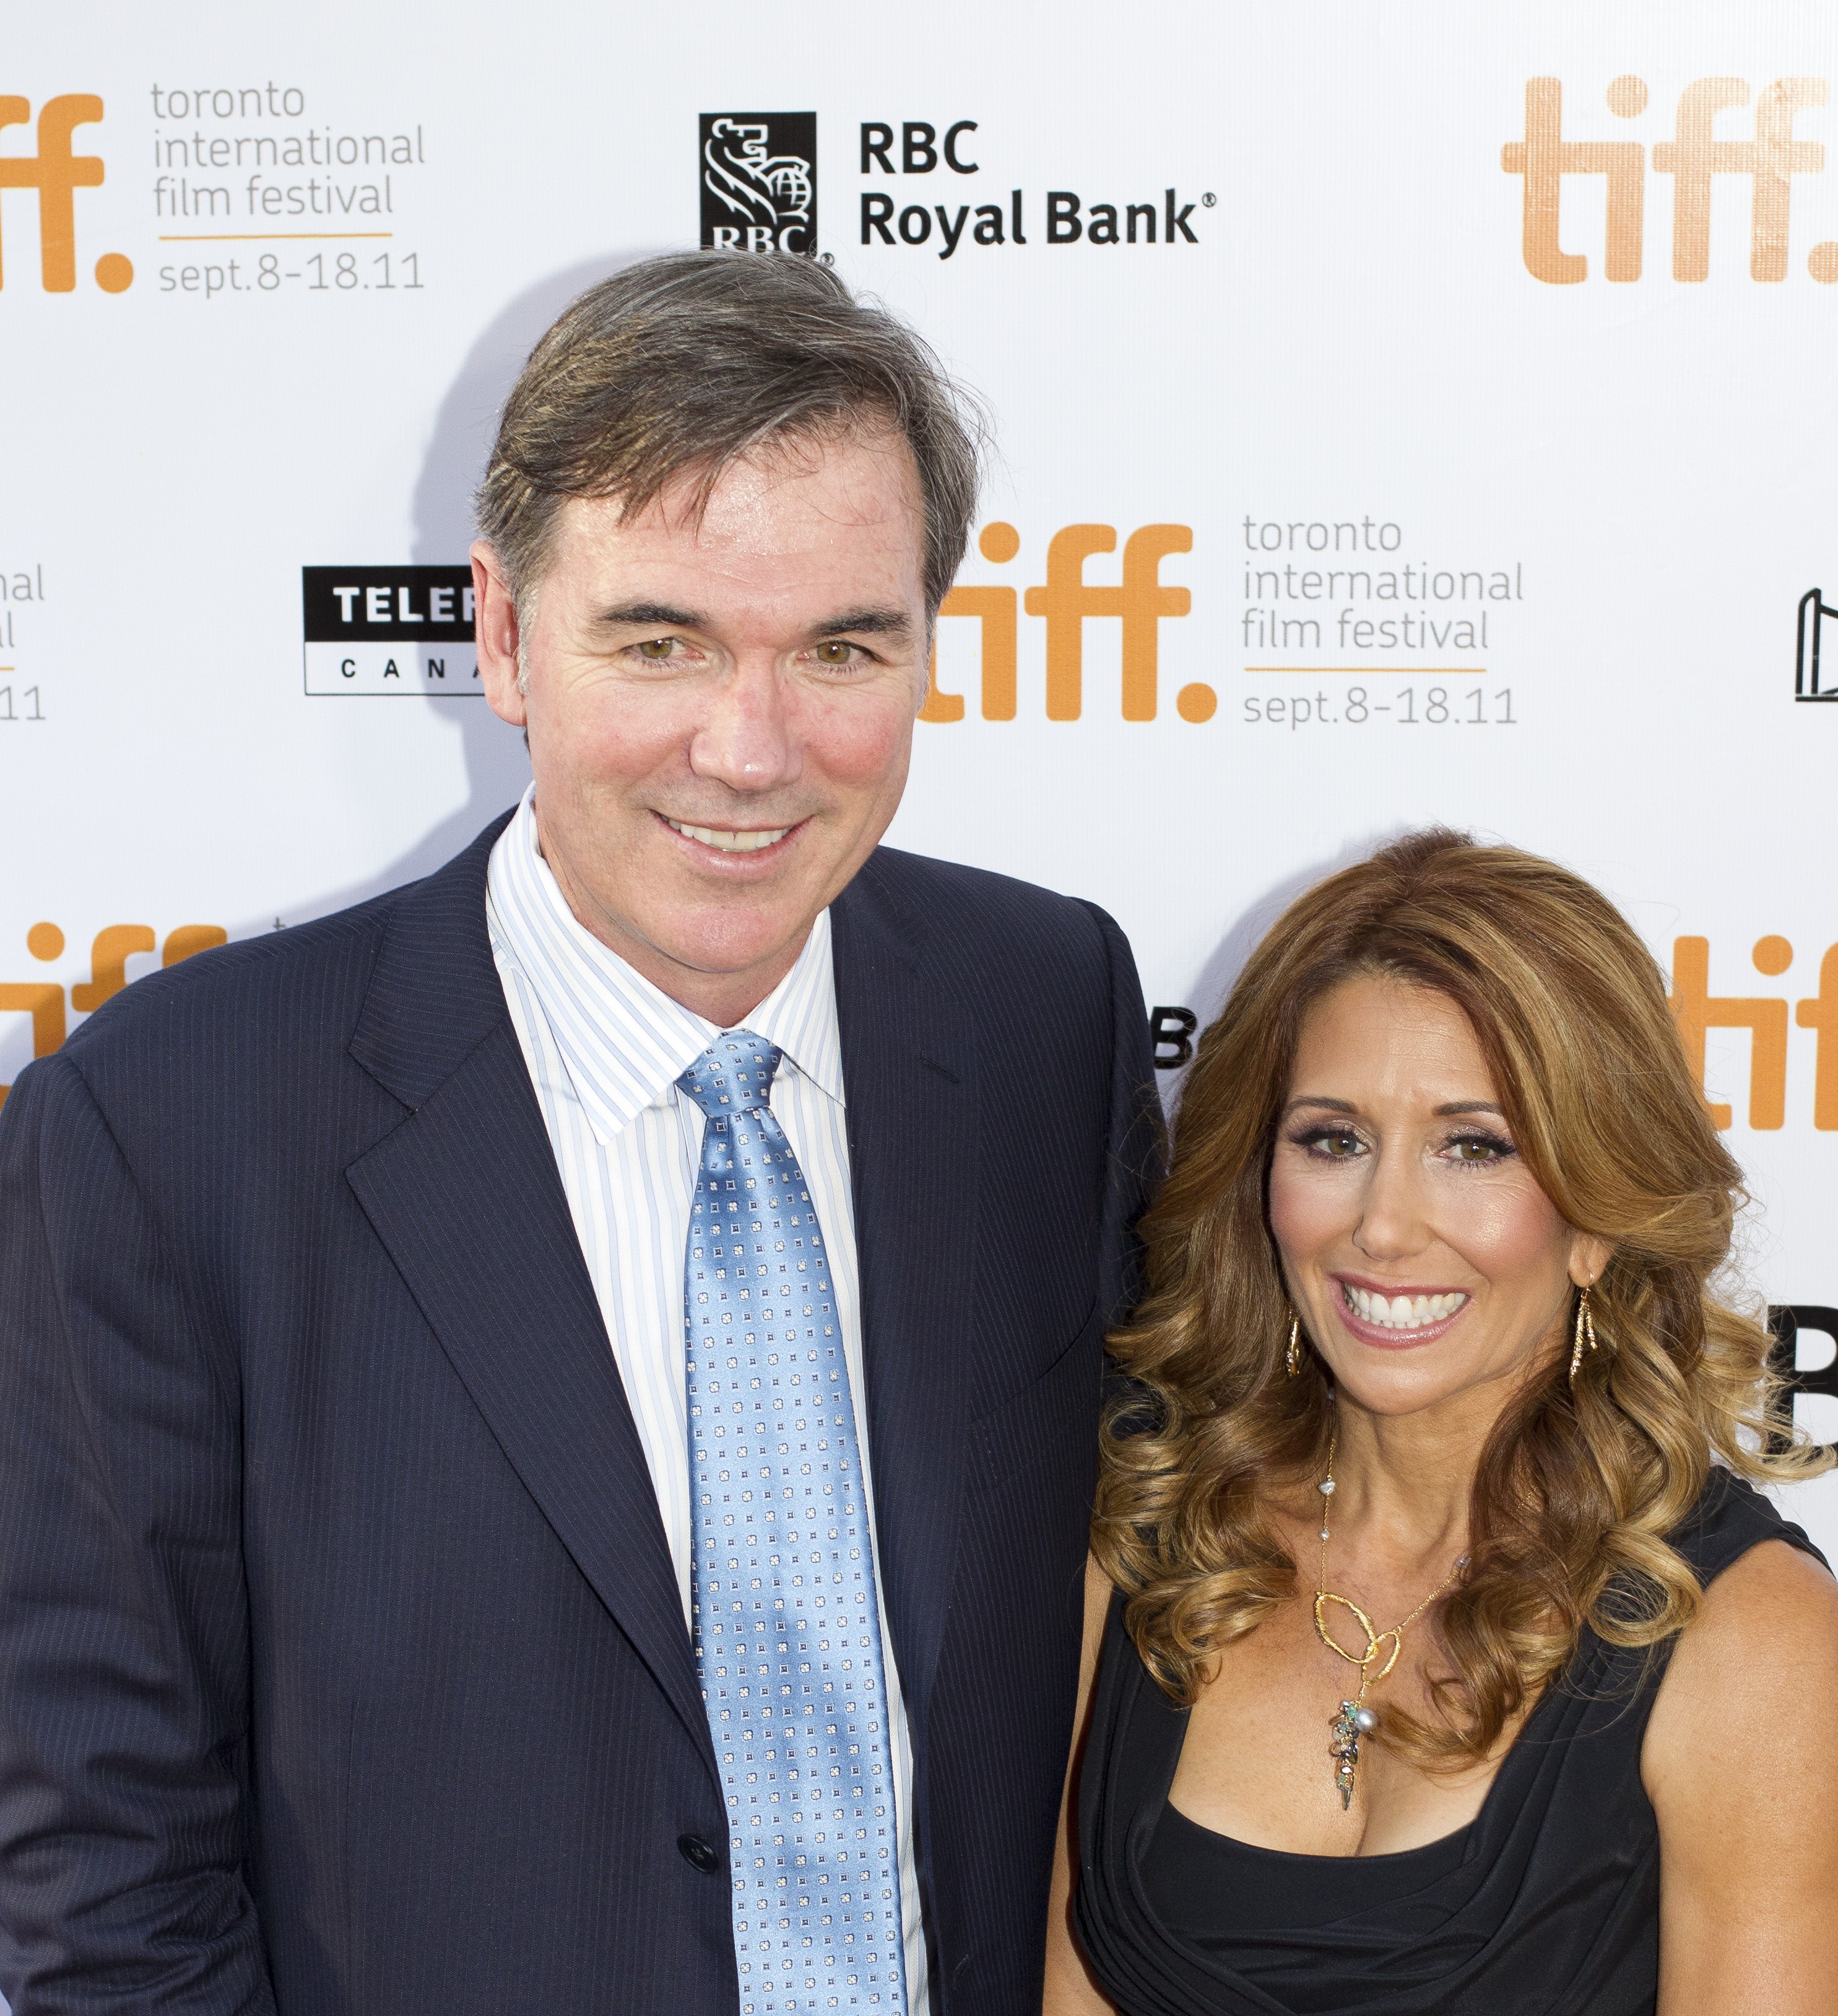 Billy Beane and wife Tara at the premiere of Moneyball.